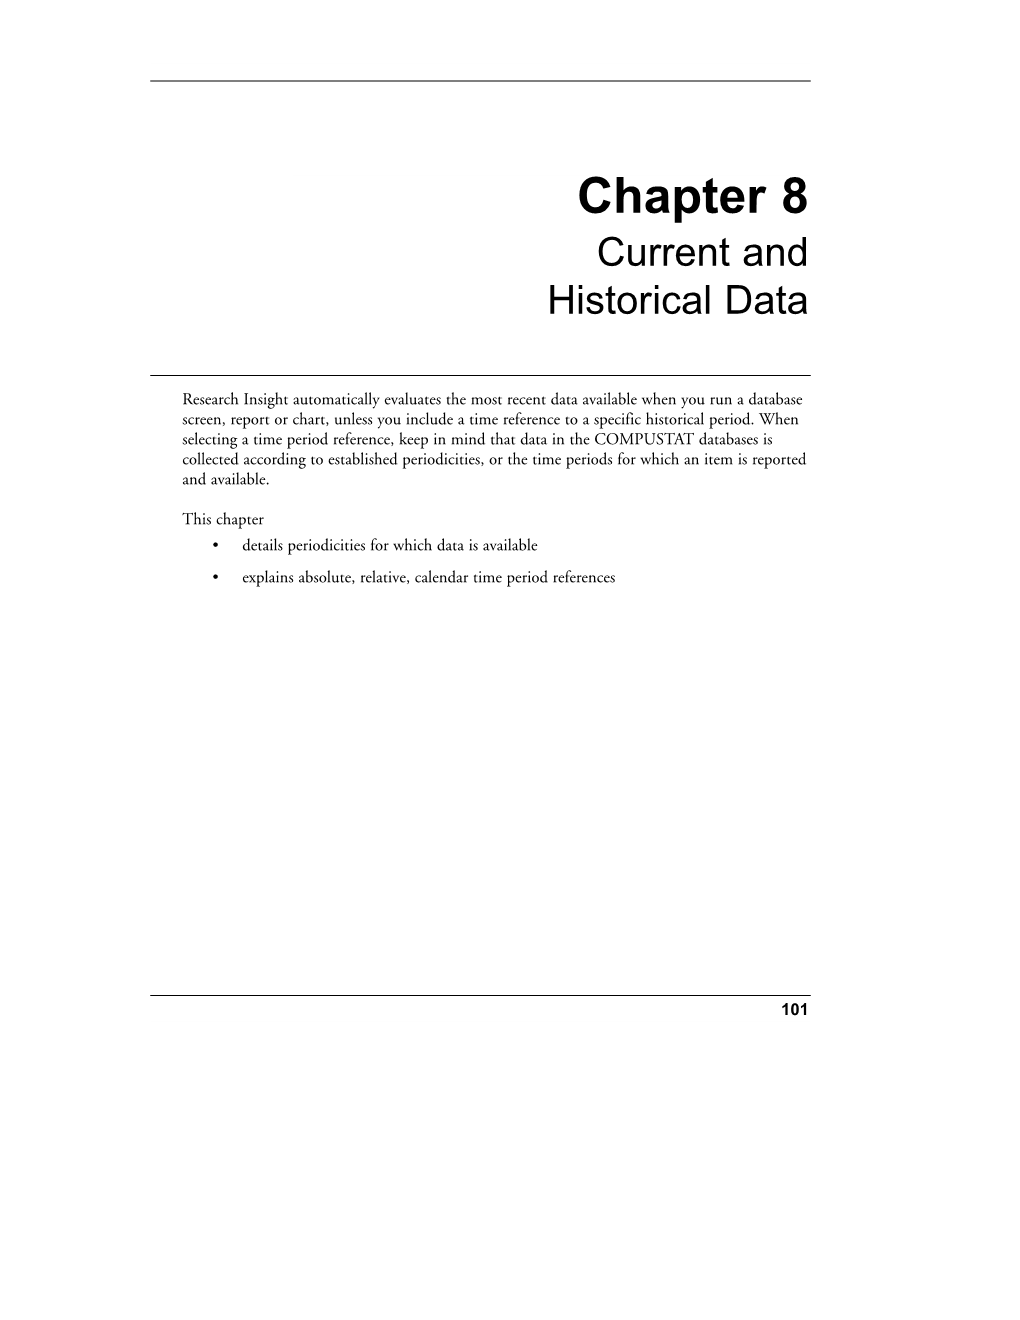 Chapter 8 Current and Historical Data